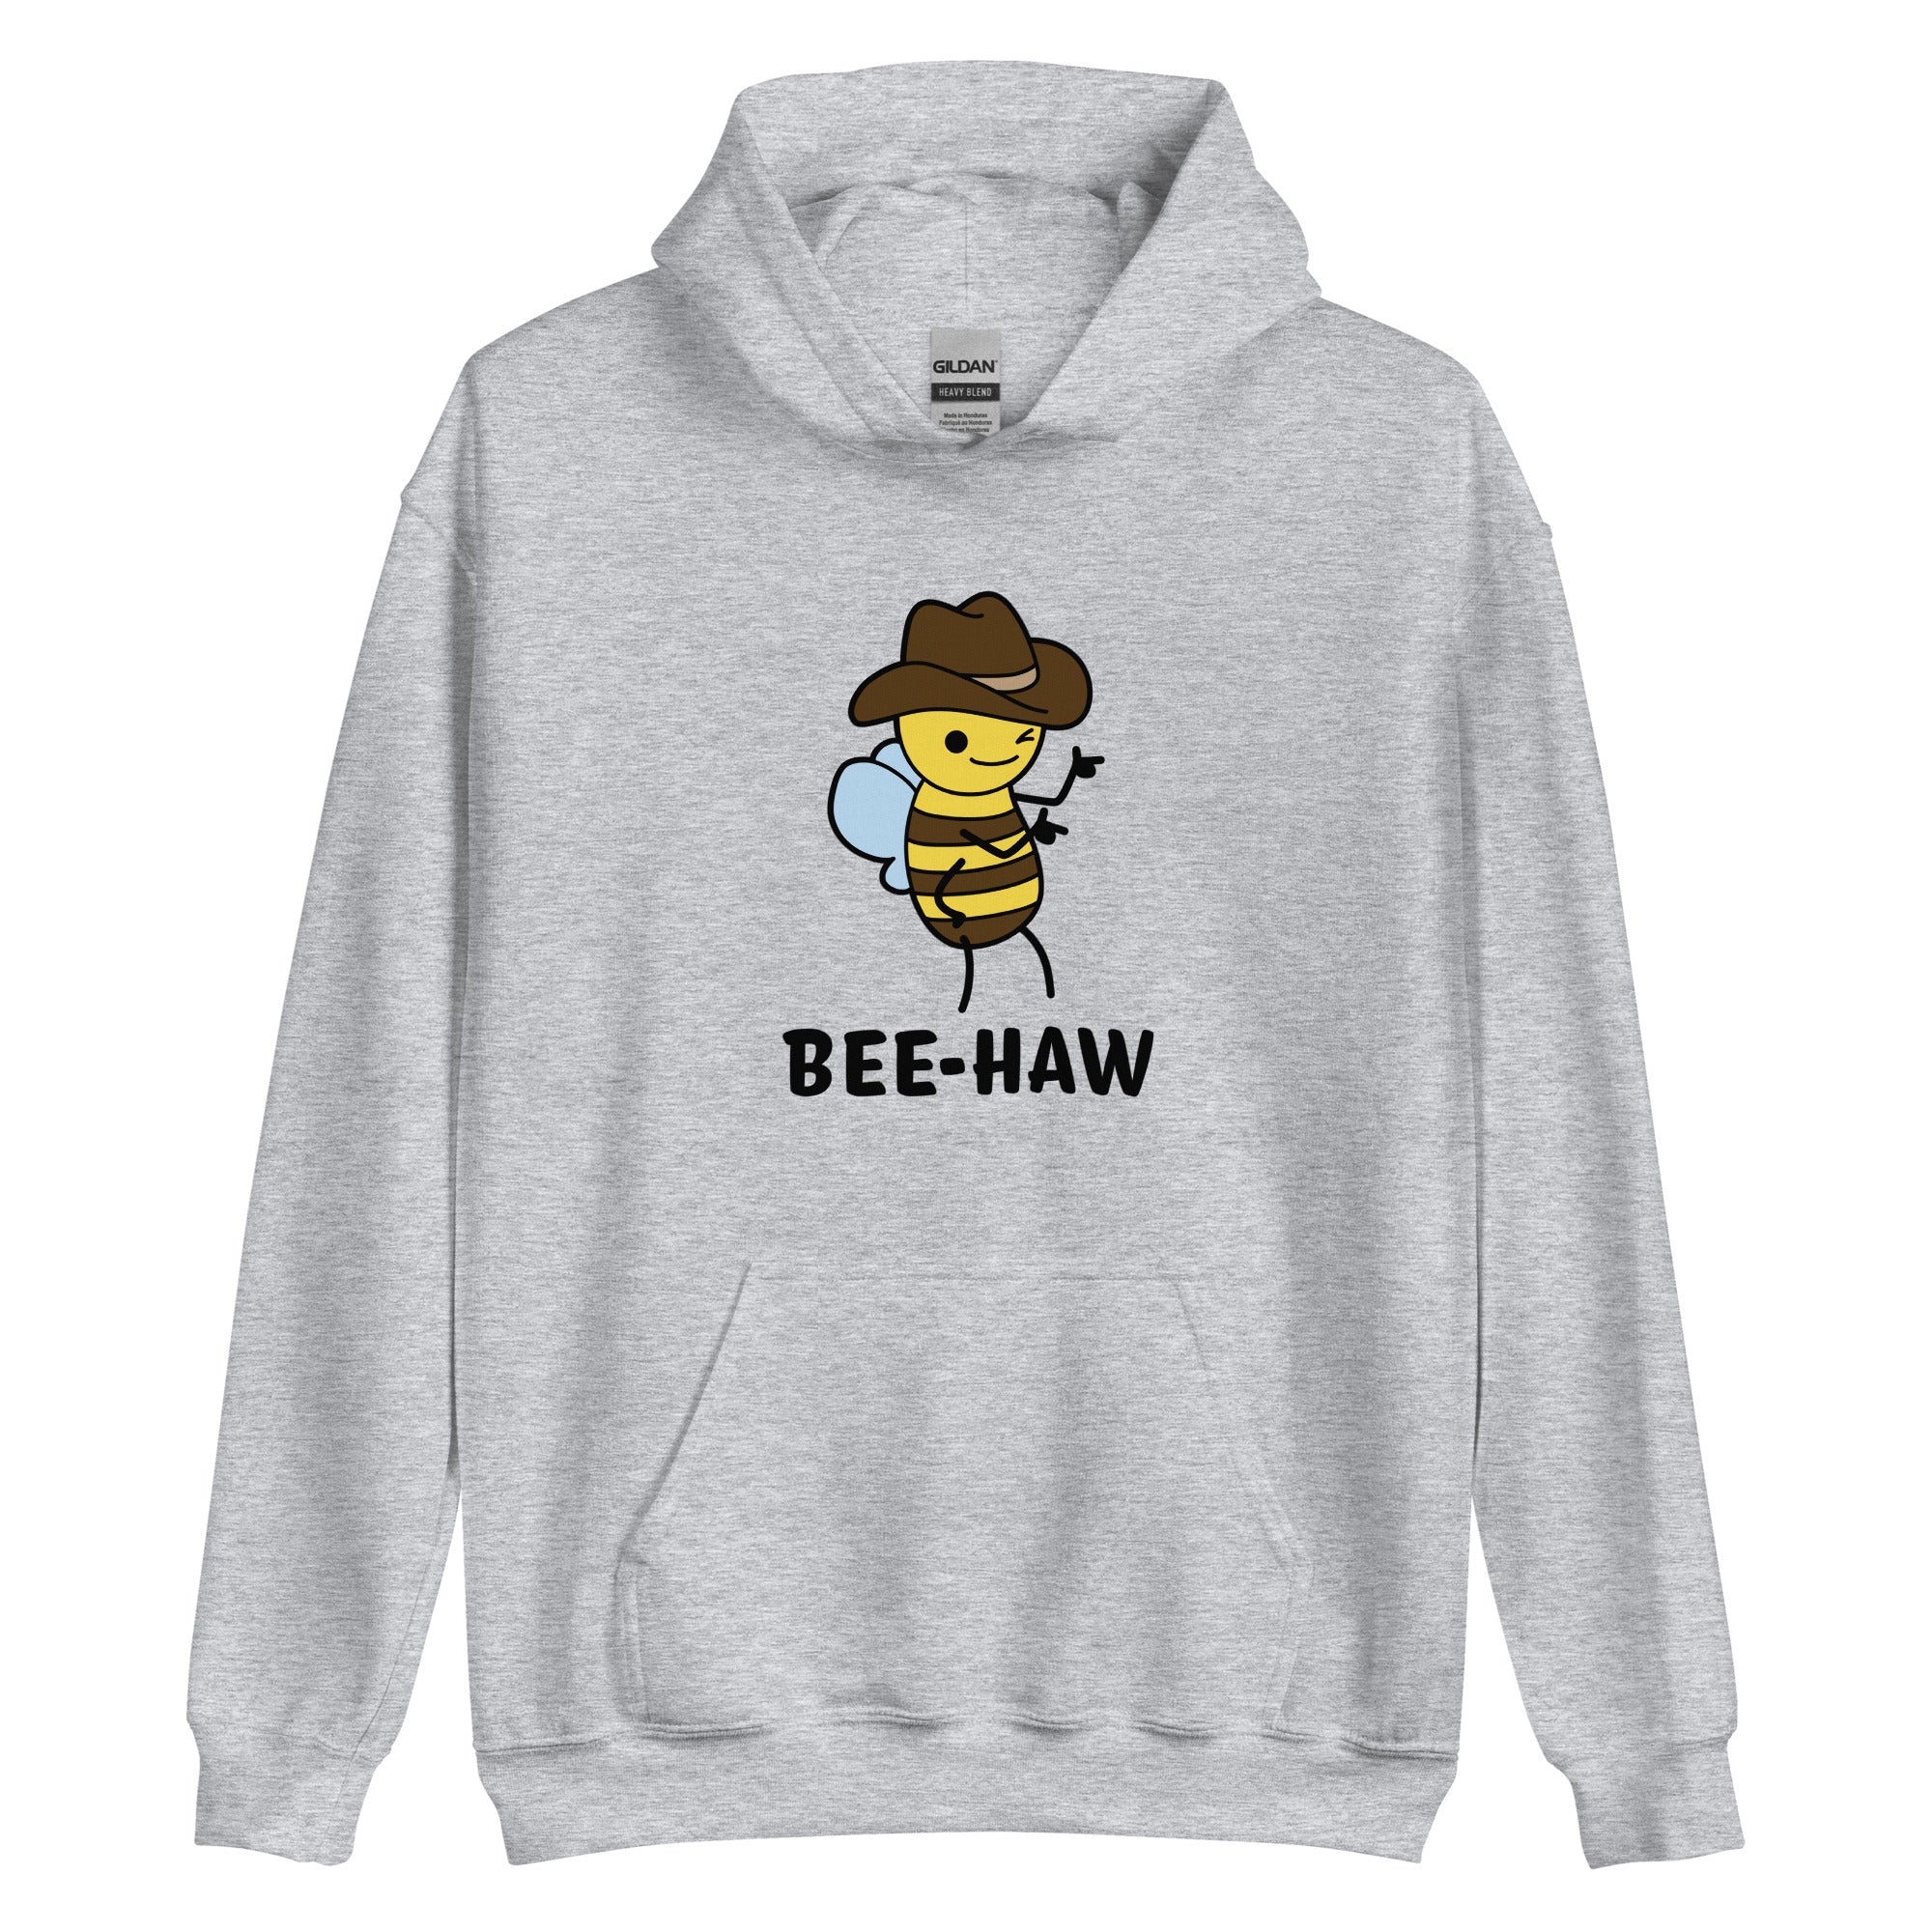 LookHUMAN Bee Nice to Bugs Gray Pullover Hoodie - Size Medium